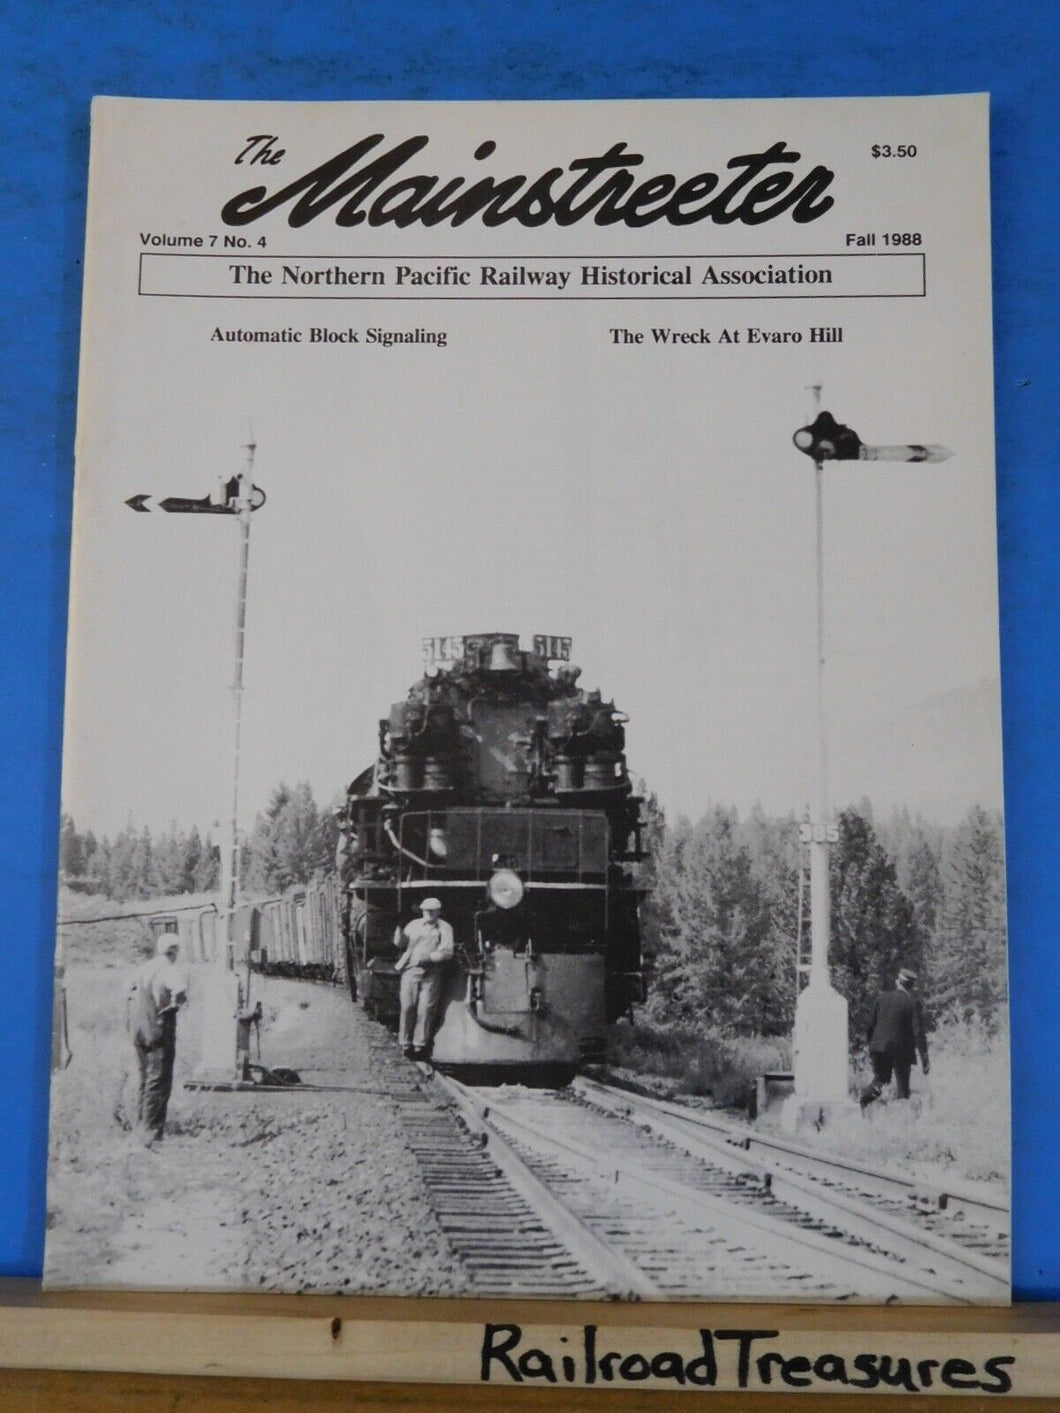 The Mainstreeter Northern Pacific Ry Historical Society Vol 7 #4 1988 Fall